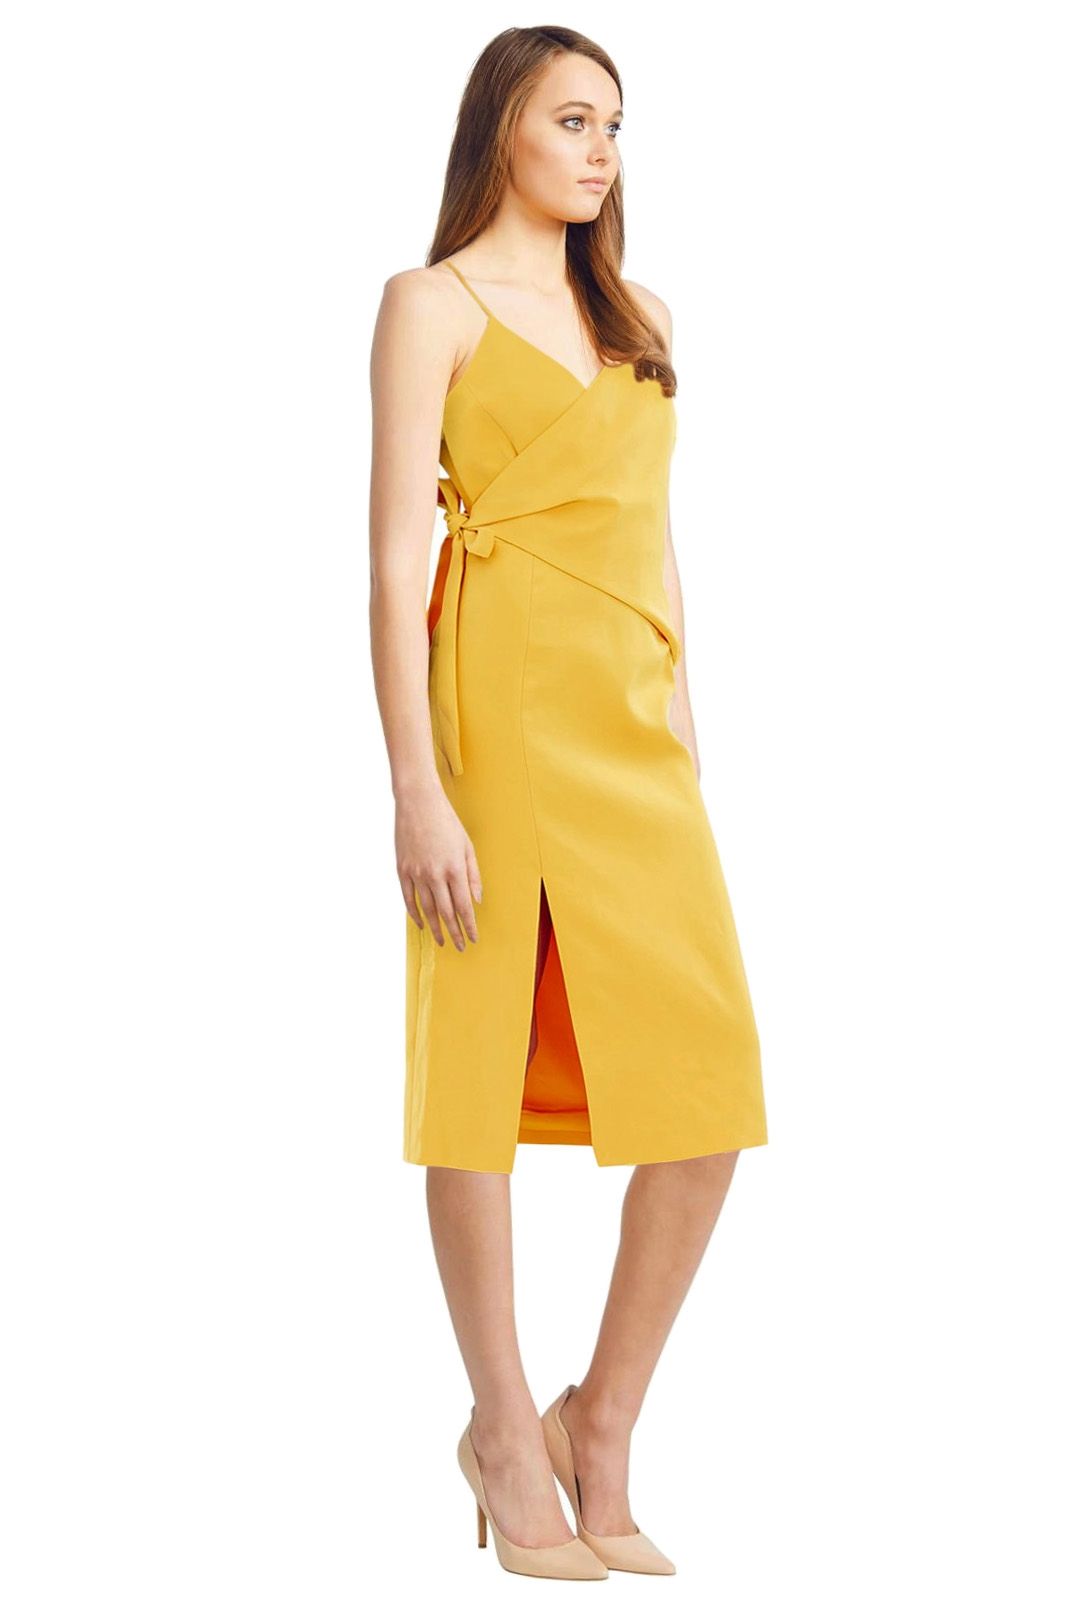 C/MEO Collective - Better Things Dress - Yellow - Side